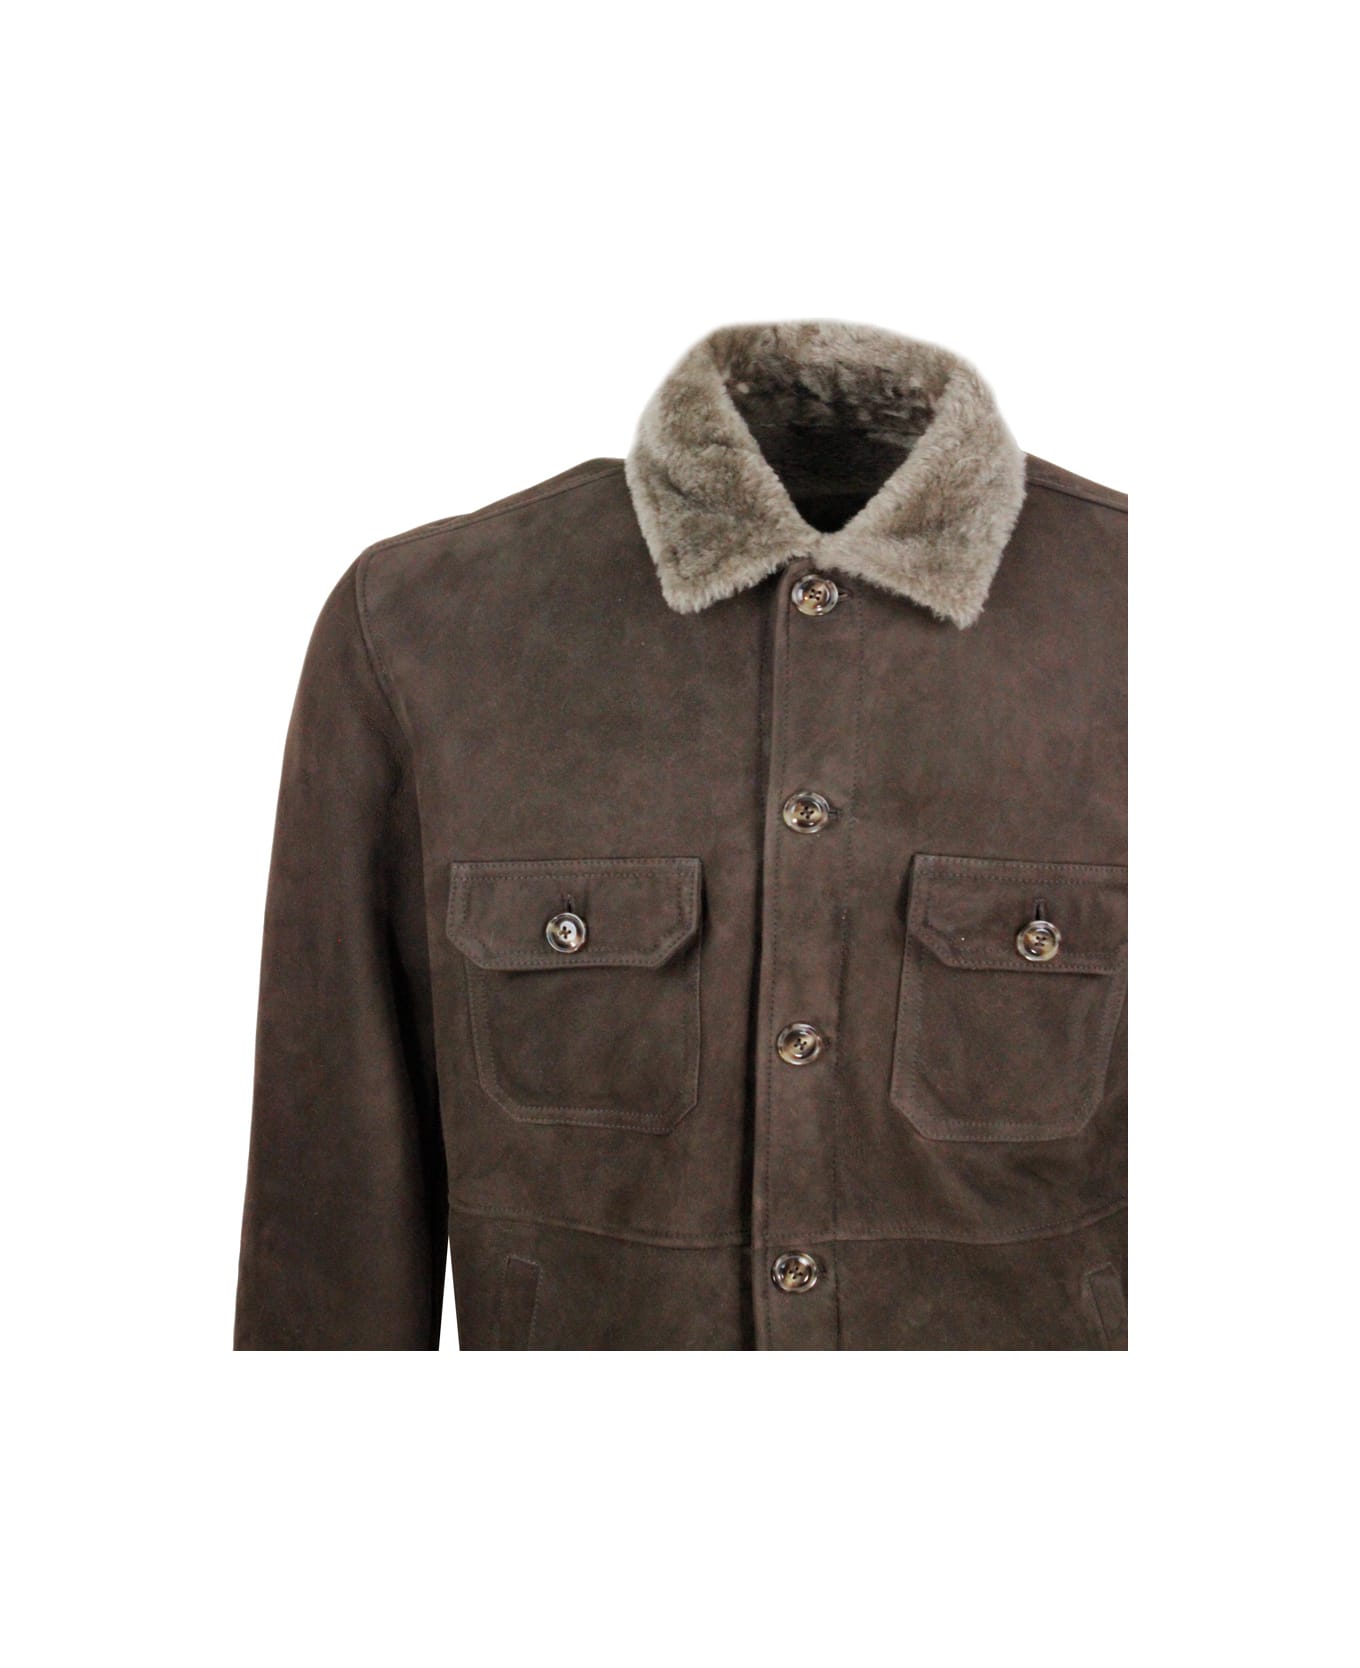 Barba Napoli Jacket In Fine And Soft Shearling Sheepskin With Button Closure, Front Welt Pockets And On The Chest - Brown